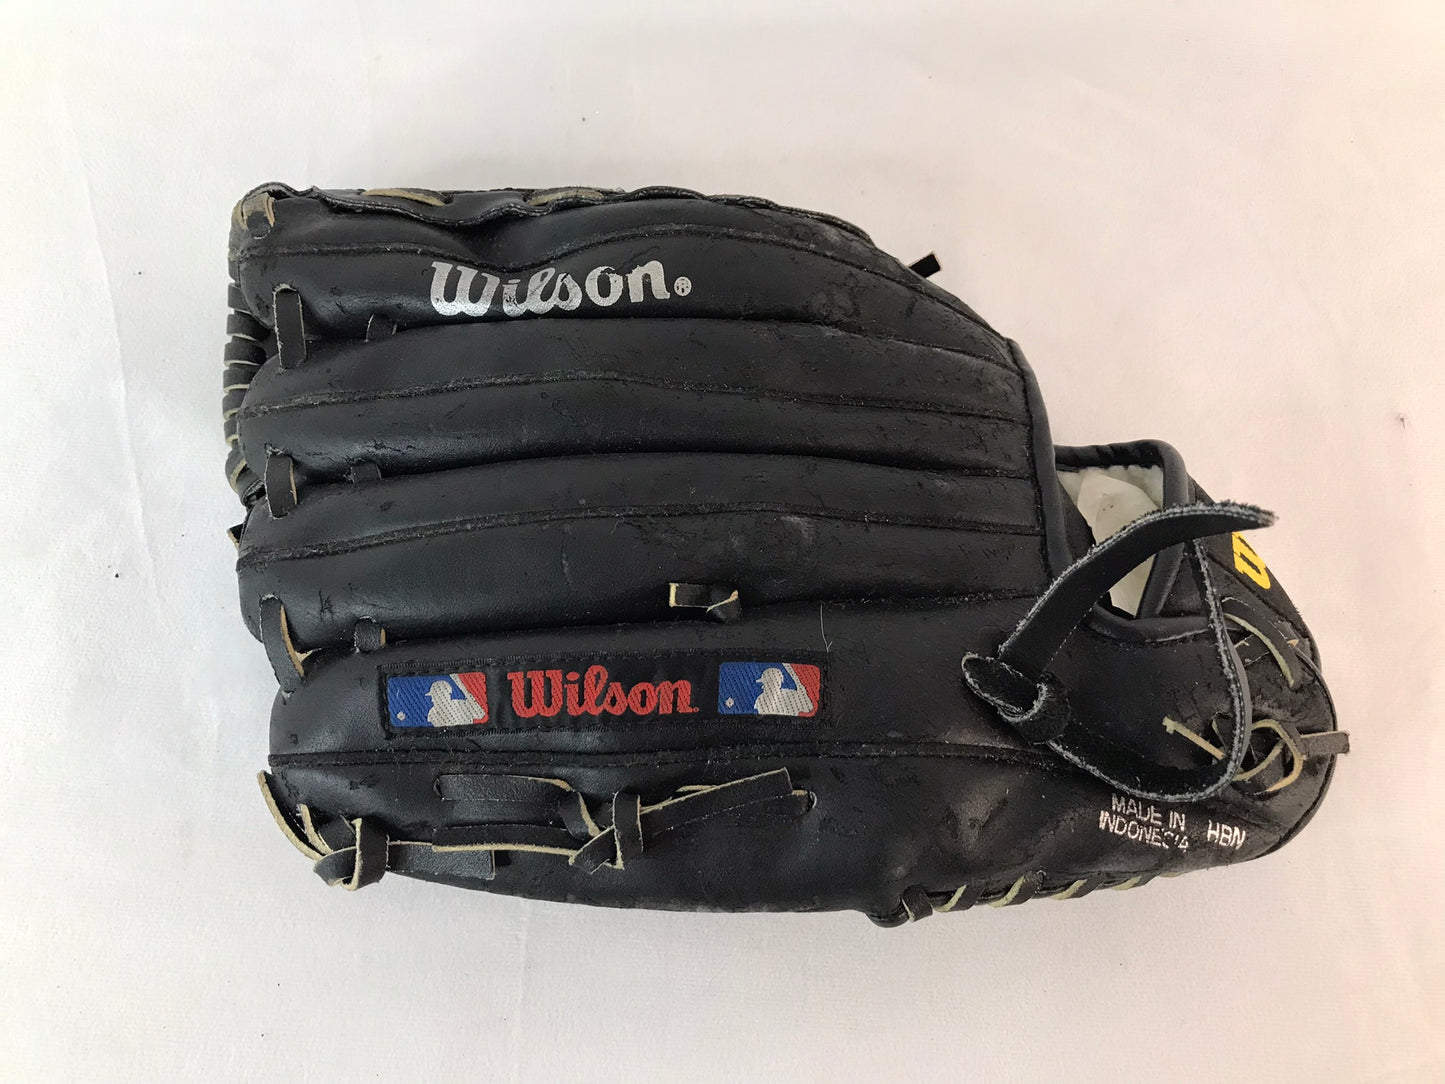 Baseball Glove Adult Size 12.5 inch Wilson Black Leather Fits on LEFT Hand Minor Wear